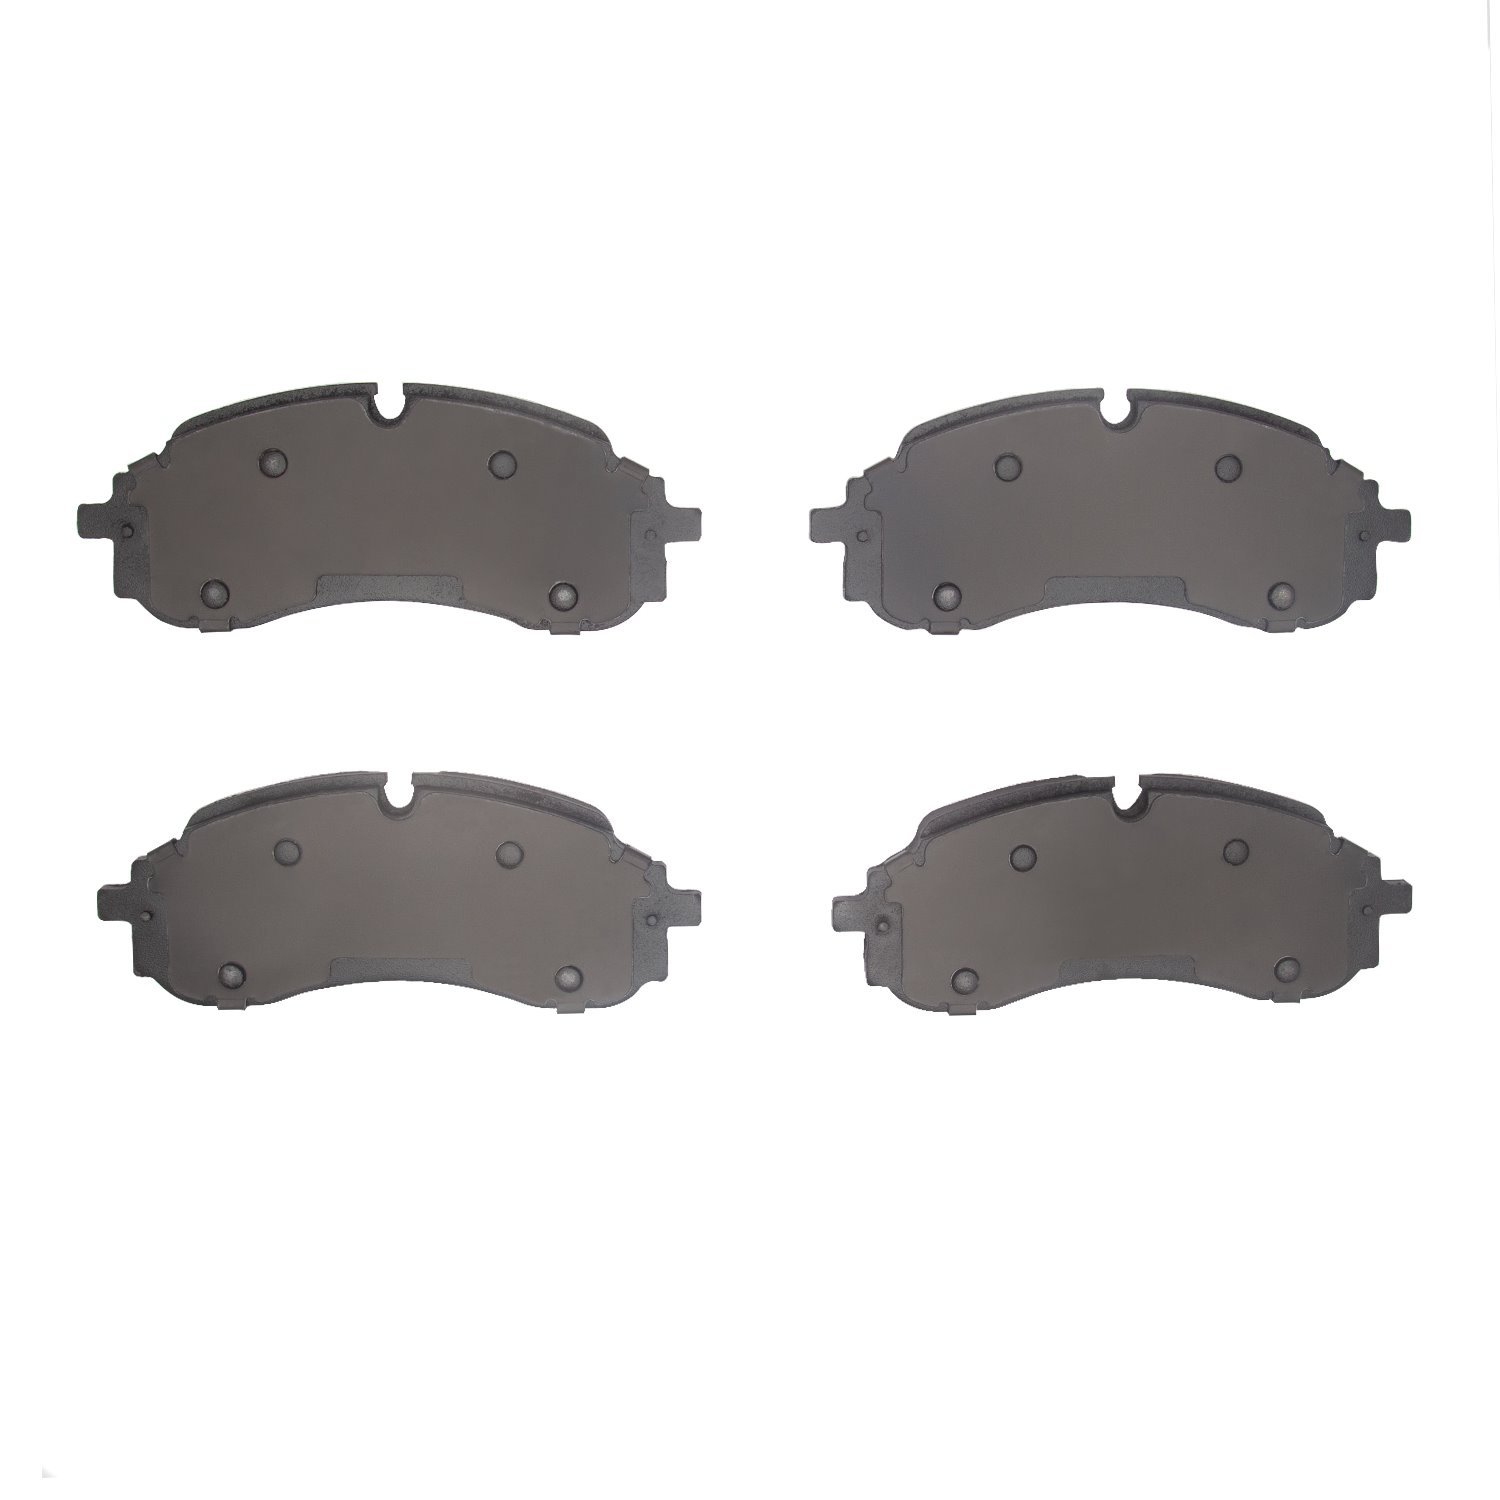 1214-2423-00 Heavy-Duty Semi-Metallic Brake Pads, Fits Select Ford/Lincoln/Mercury/Mazda, Position: Front